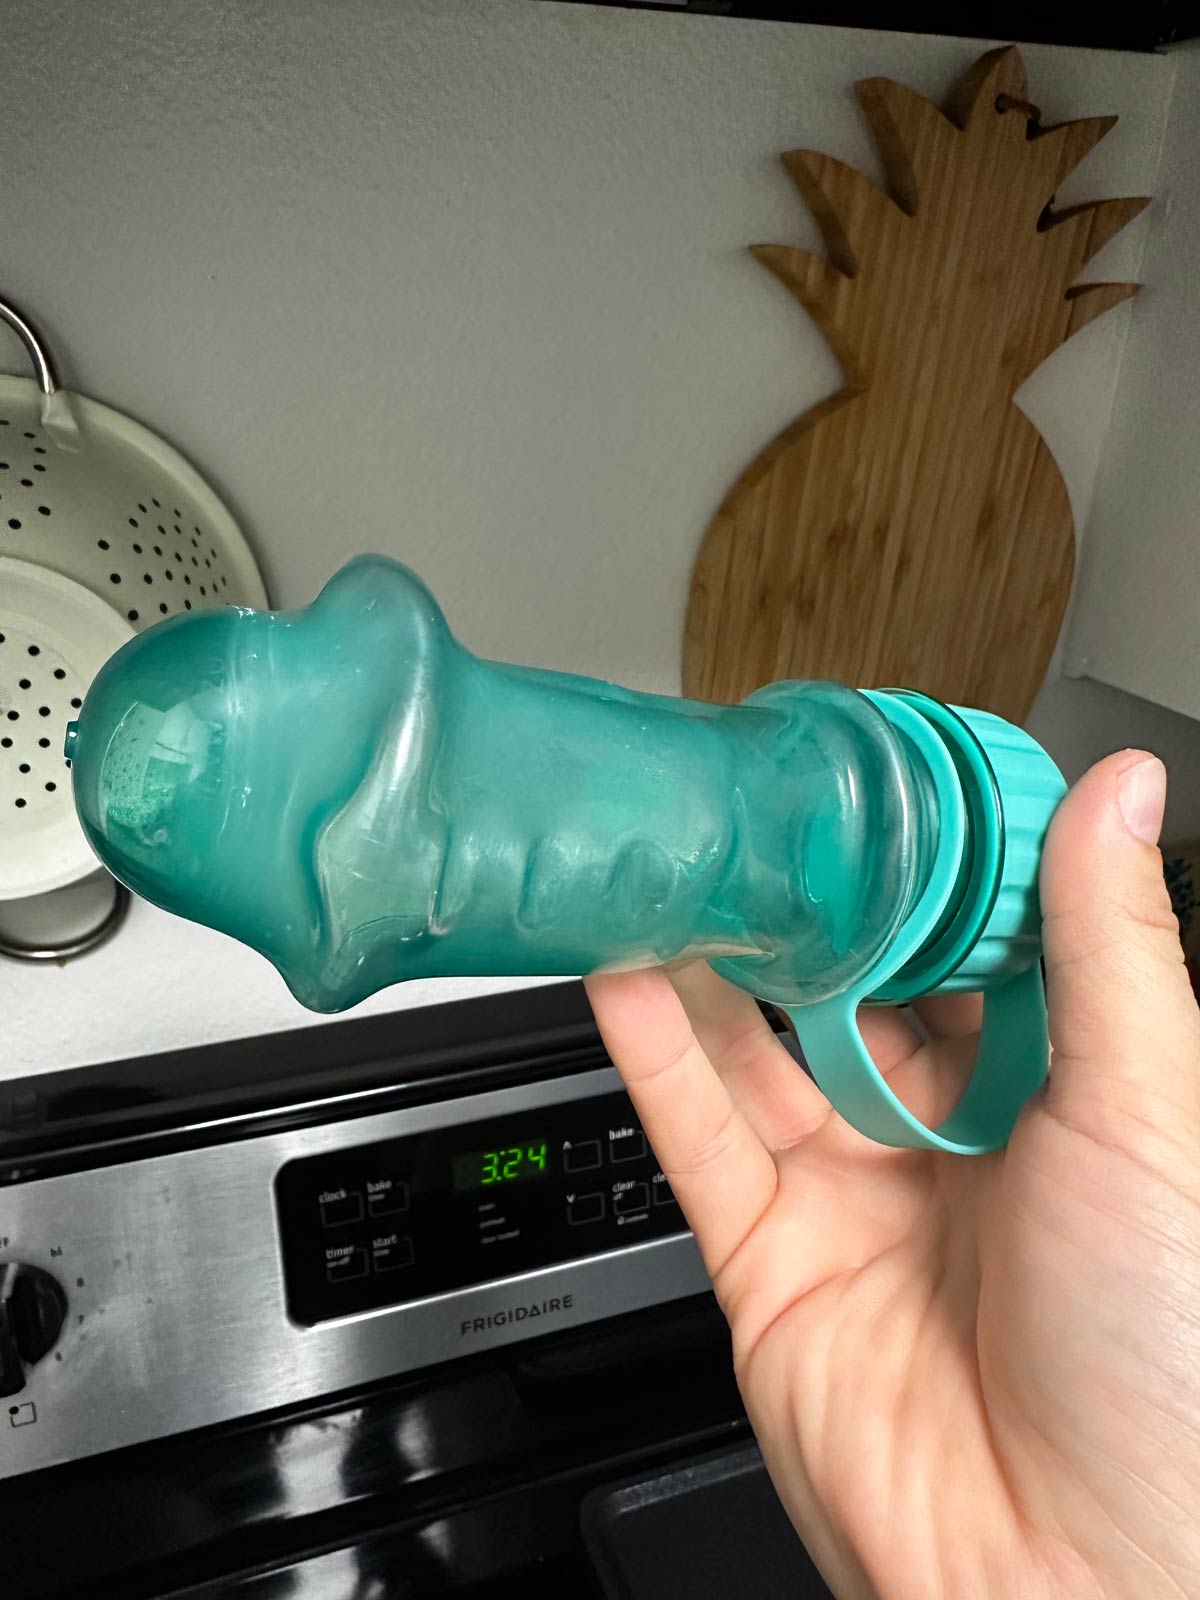 Didn’t realize this water bottle wasn’t dishwasher safe. Look what it turned into